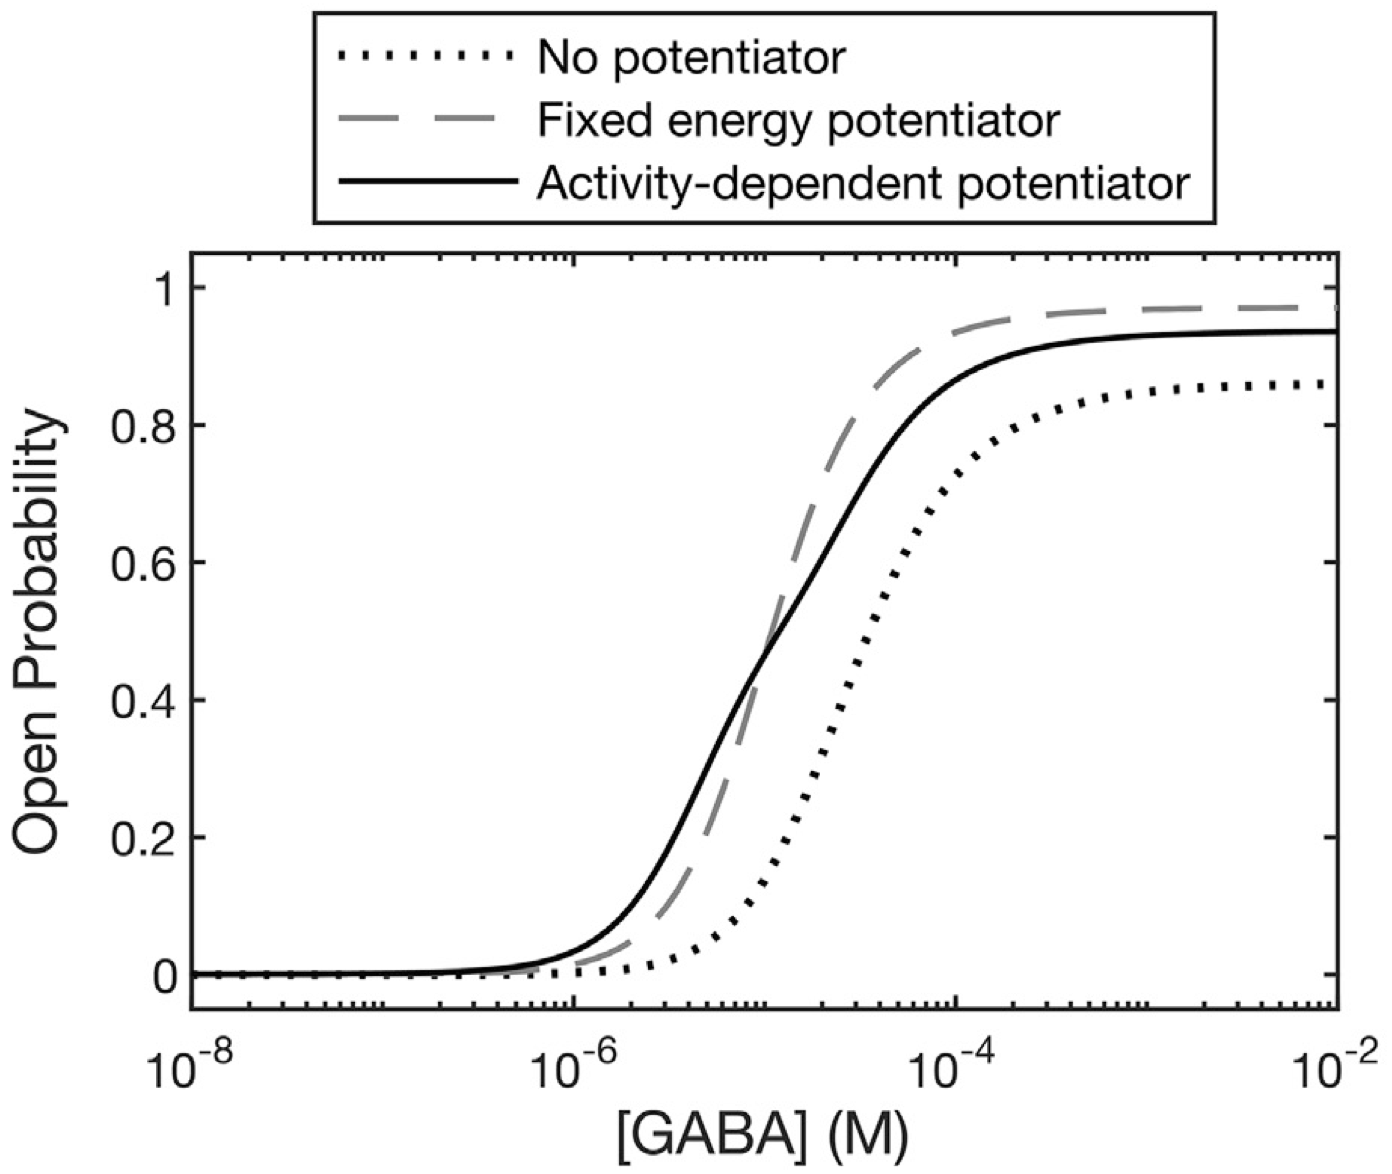 State-dependent potentiator